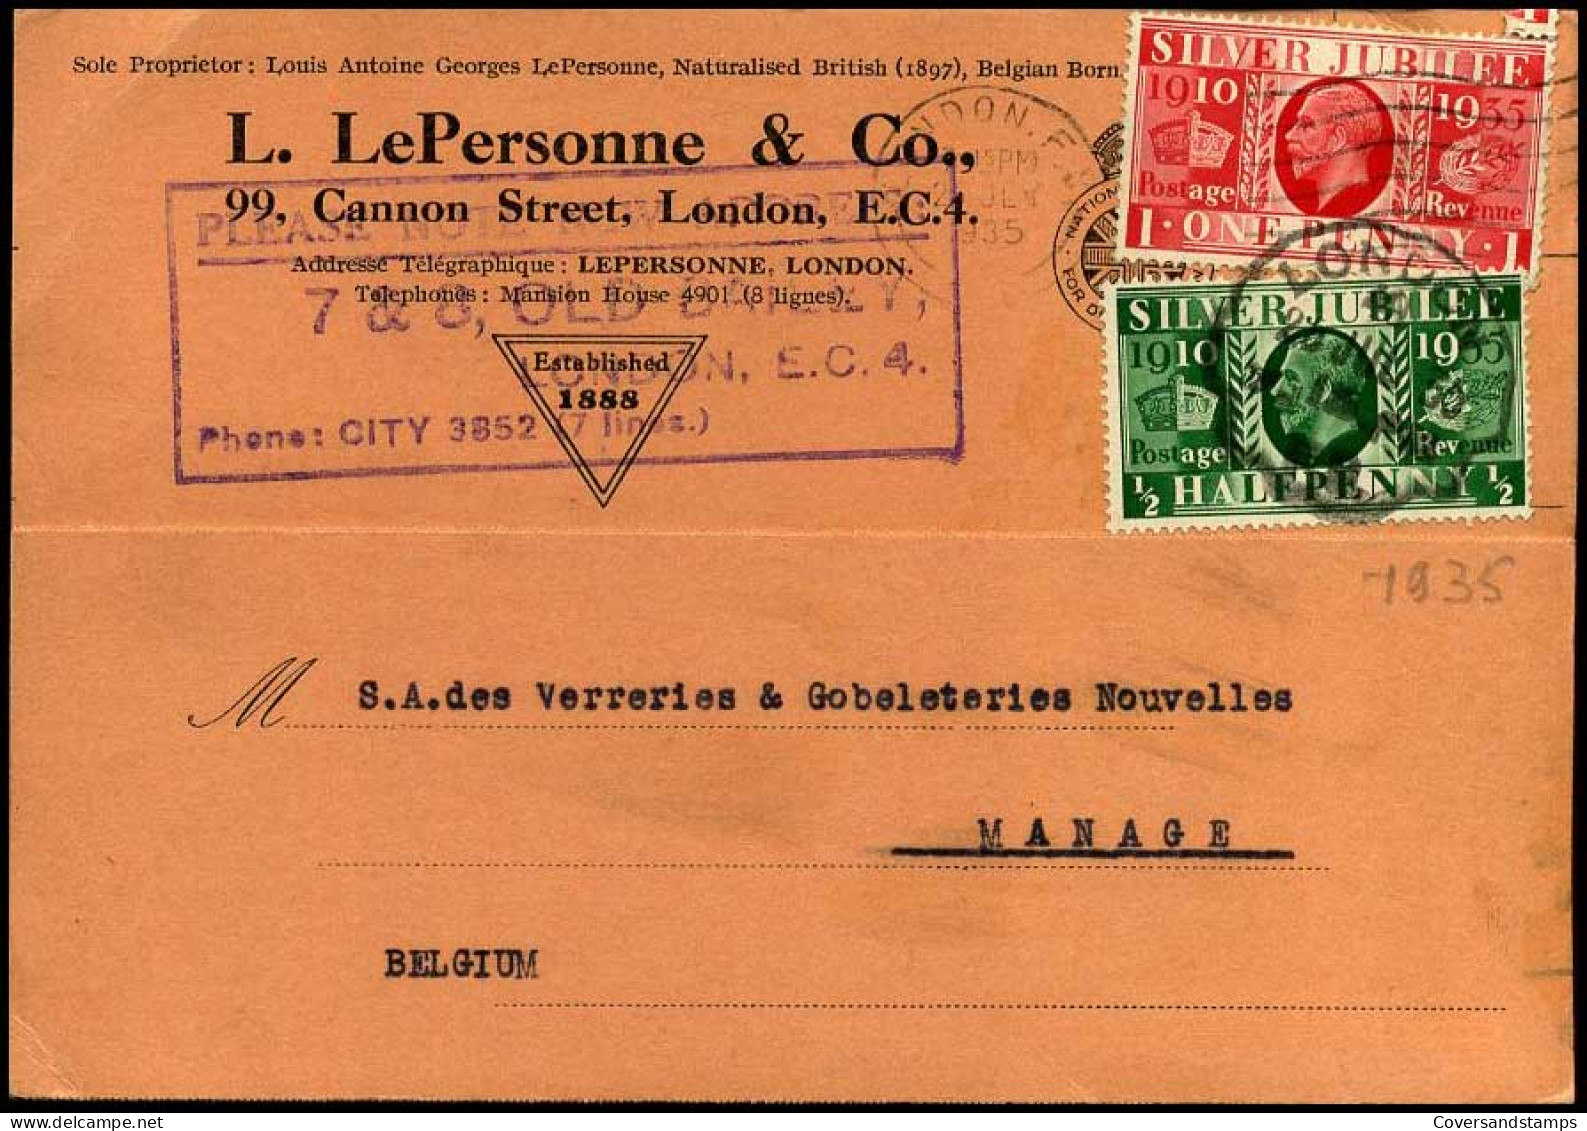 Great-Britain - Postcard To Belgium -- L. LePersonne & Co, London - Covers & Documents